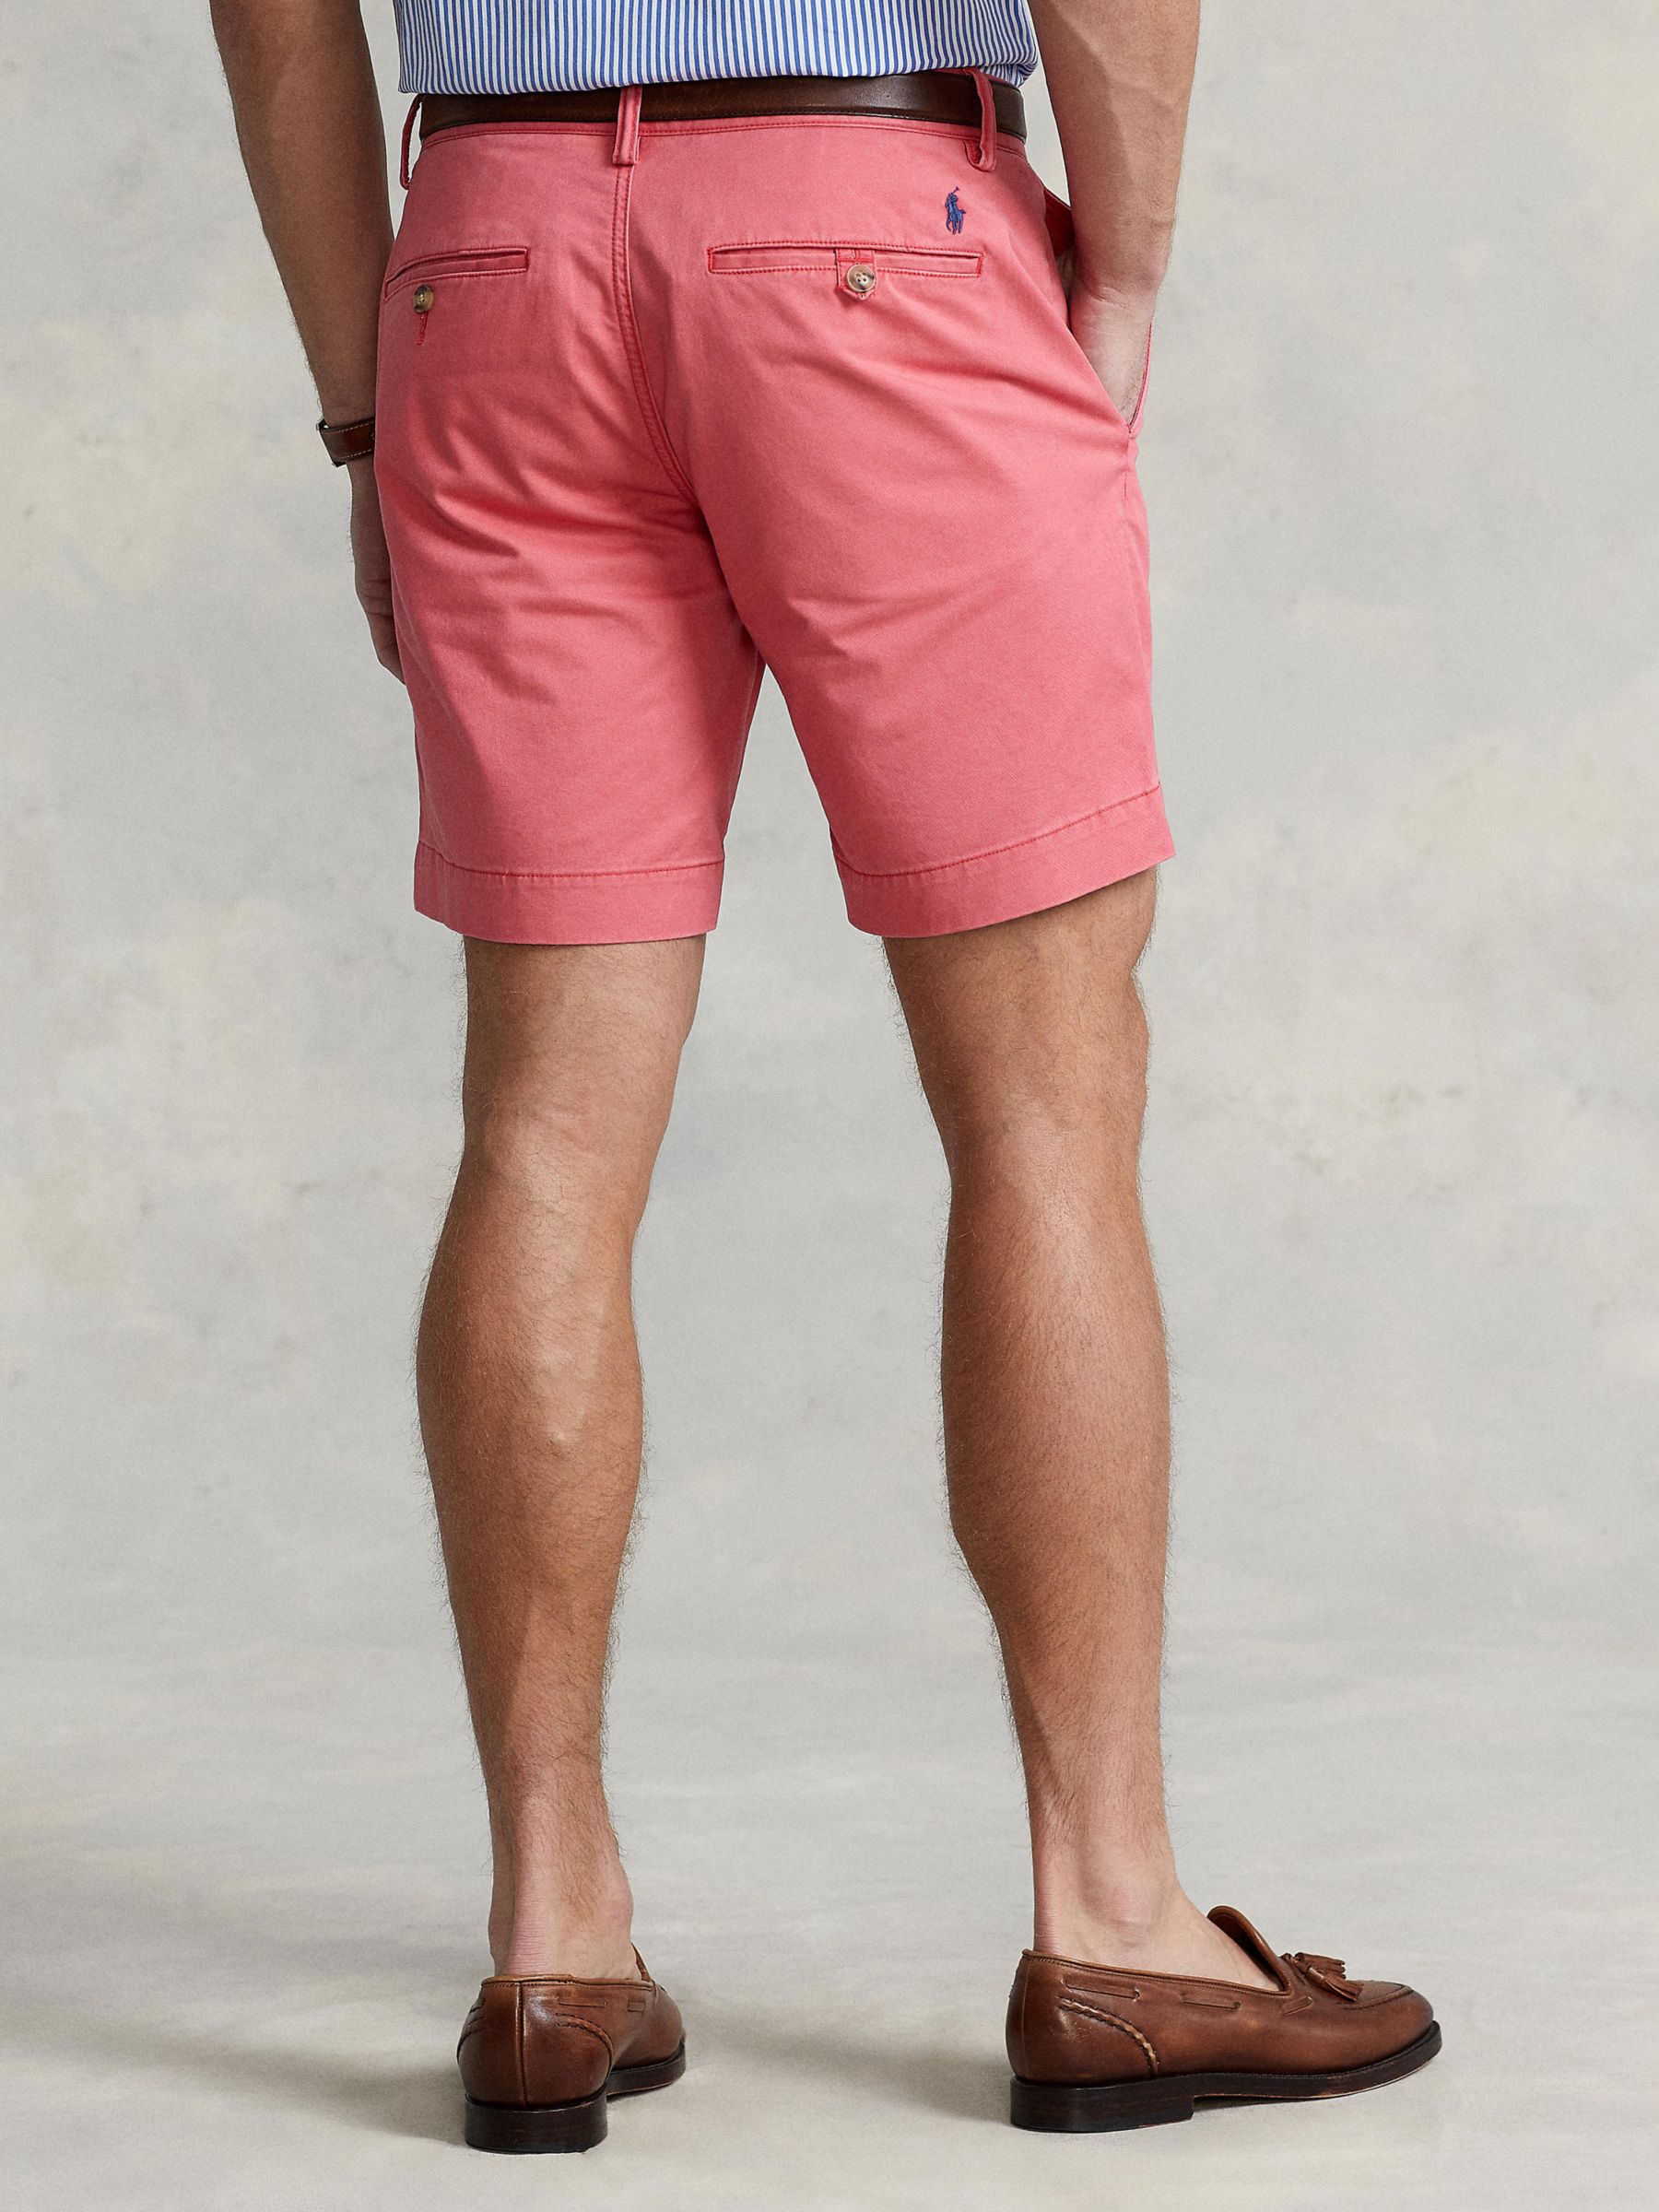 Ralph Lauren Stretch Straight Fit Chino Shorts, Nantucket Red, 38R